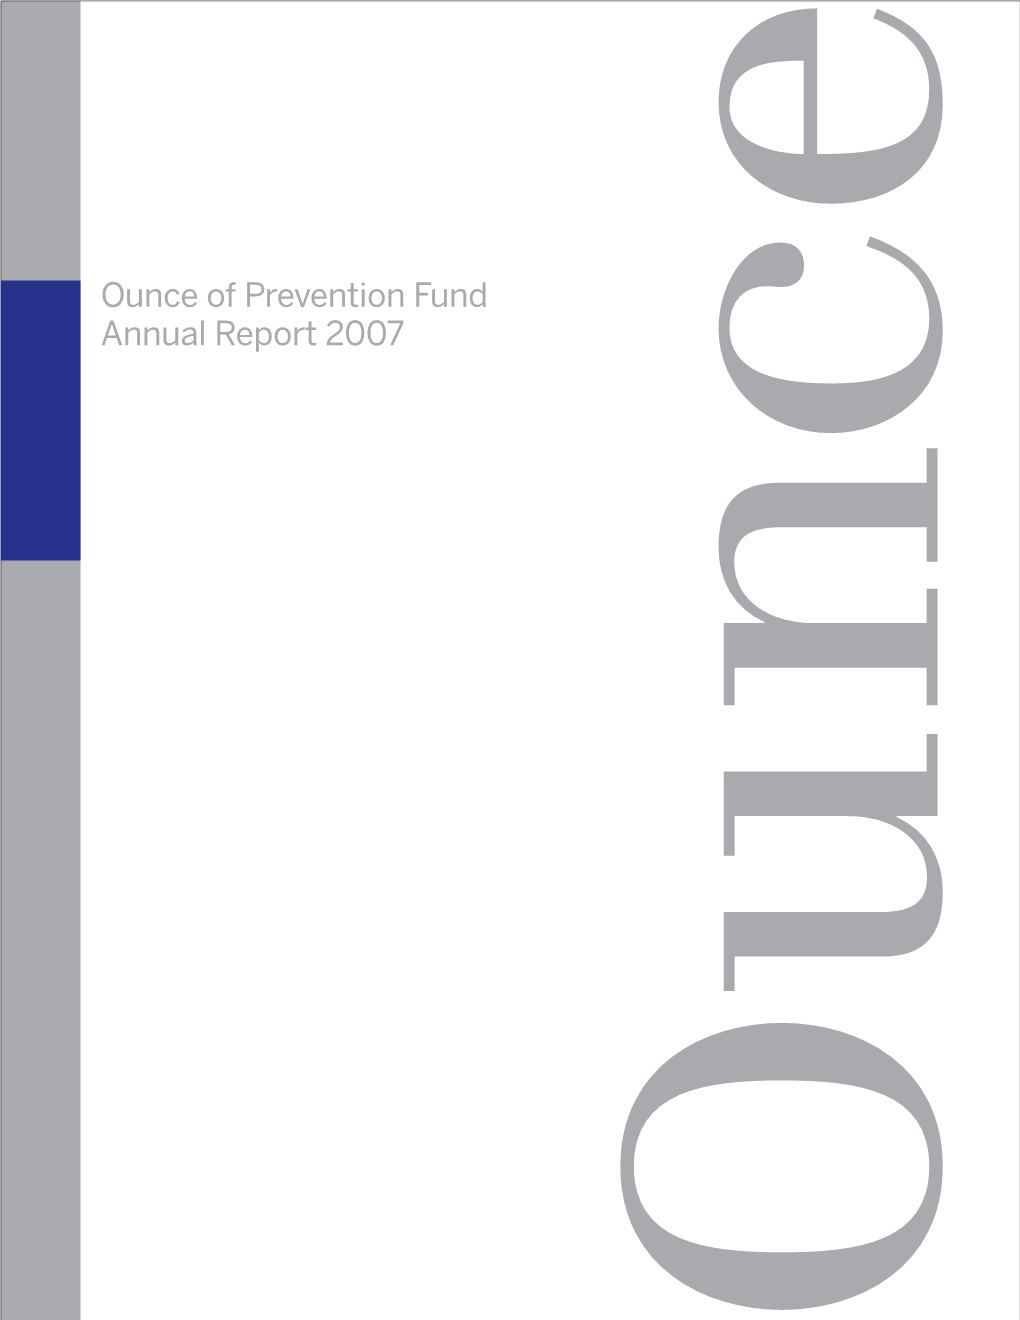 1 1 Ounce of Prevention Fund Annual Report 2007